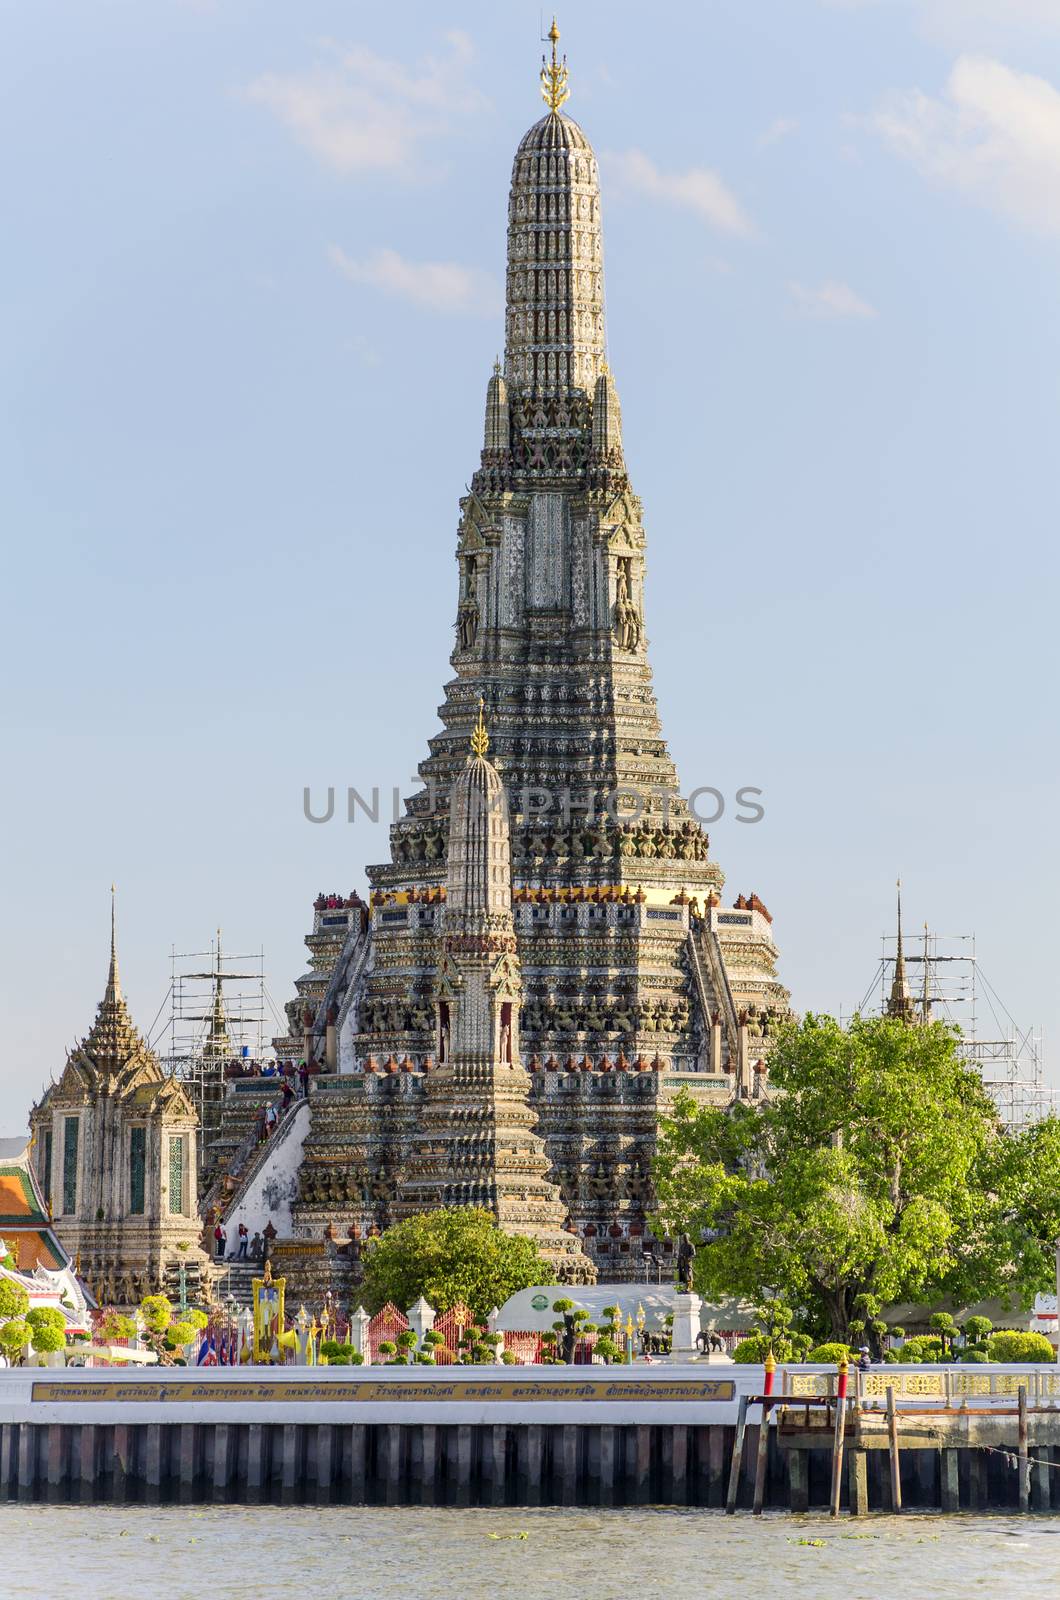 BANGKOK - JULY 3: View of Wat arun temple from ferry boat on cha by siiixth